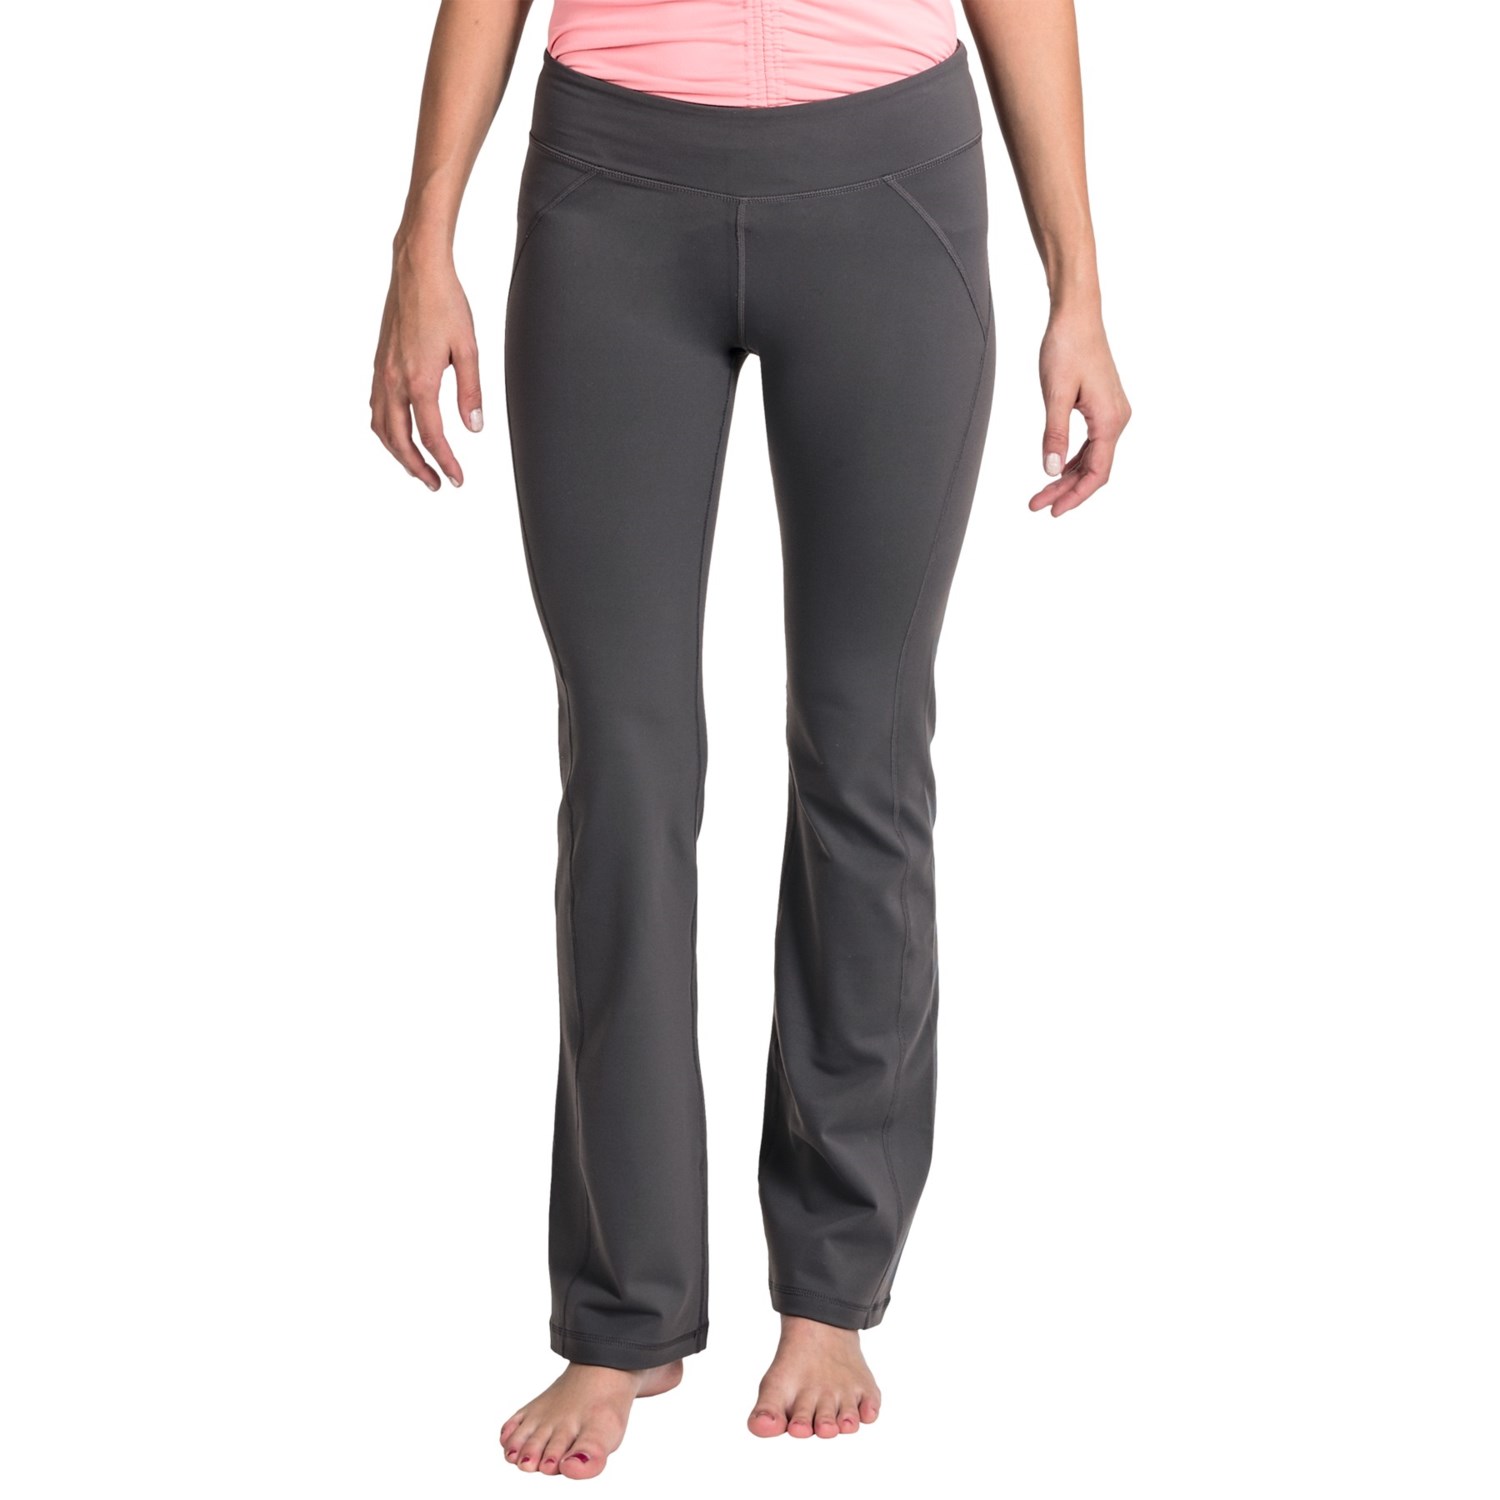 Soybu Killer Caboose Pants (For Women) 6472R - Save 55%